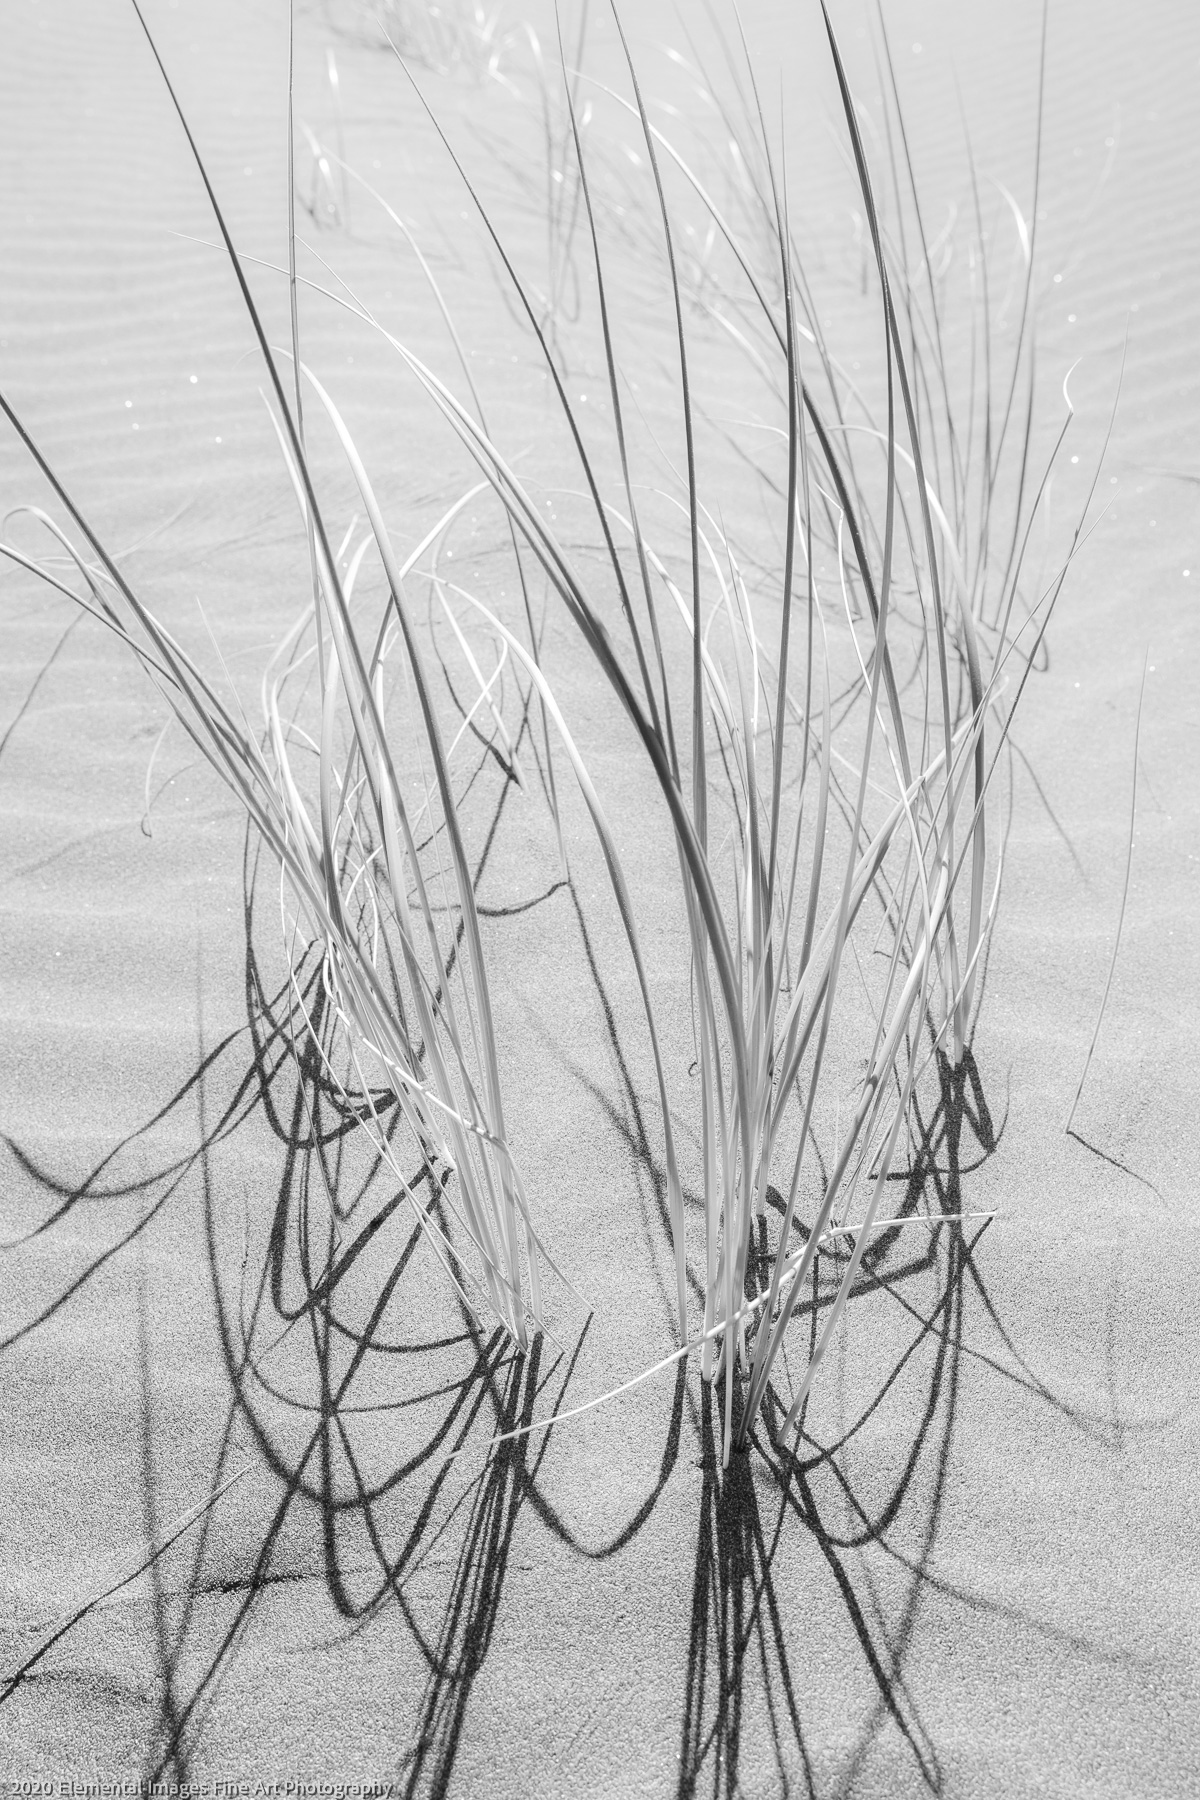 Grasses #178 | Pistol River | OR | USA - © 2020 Elemental Images Fine Art Photography - All Rights Reserved Worldwide